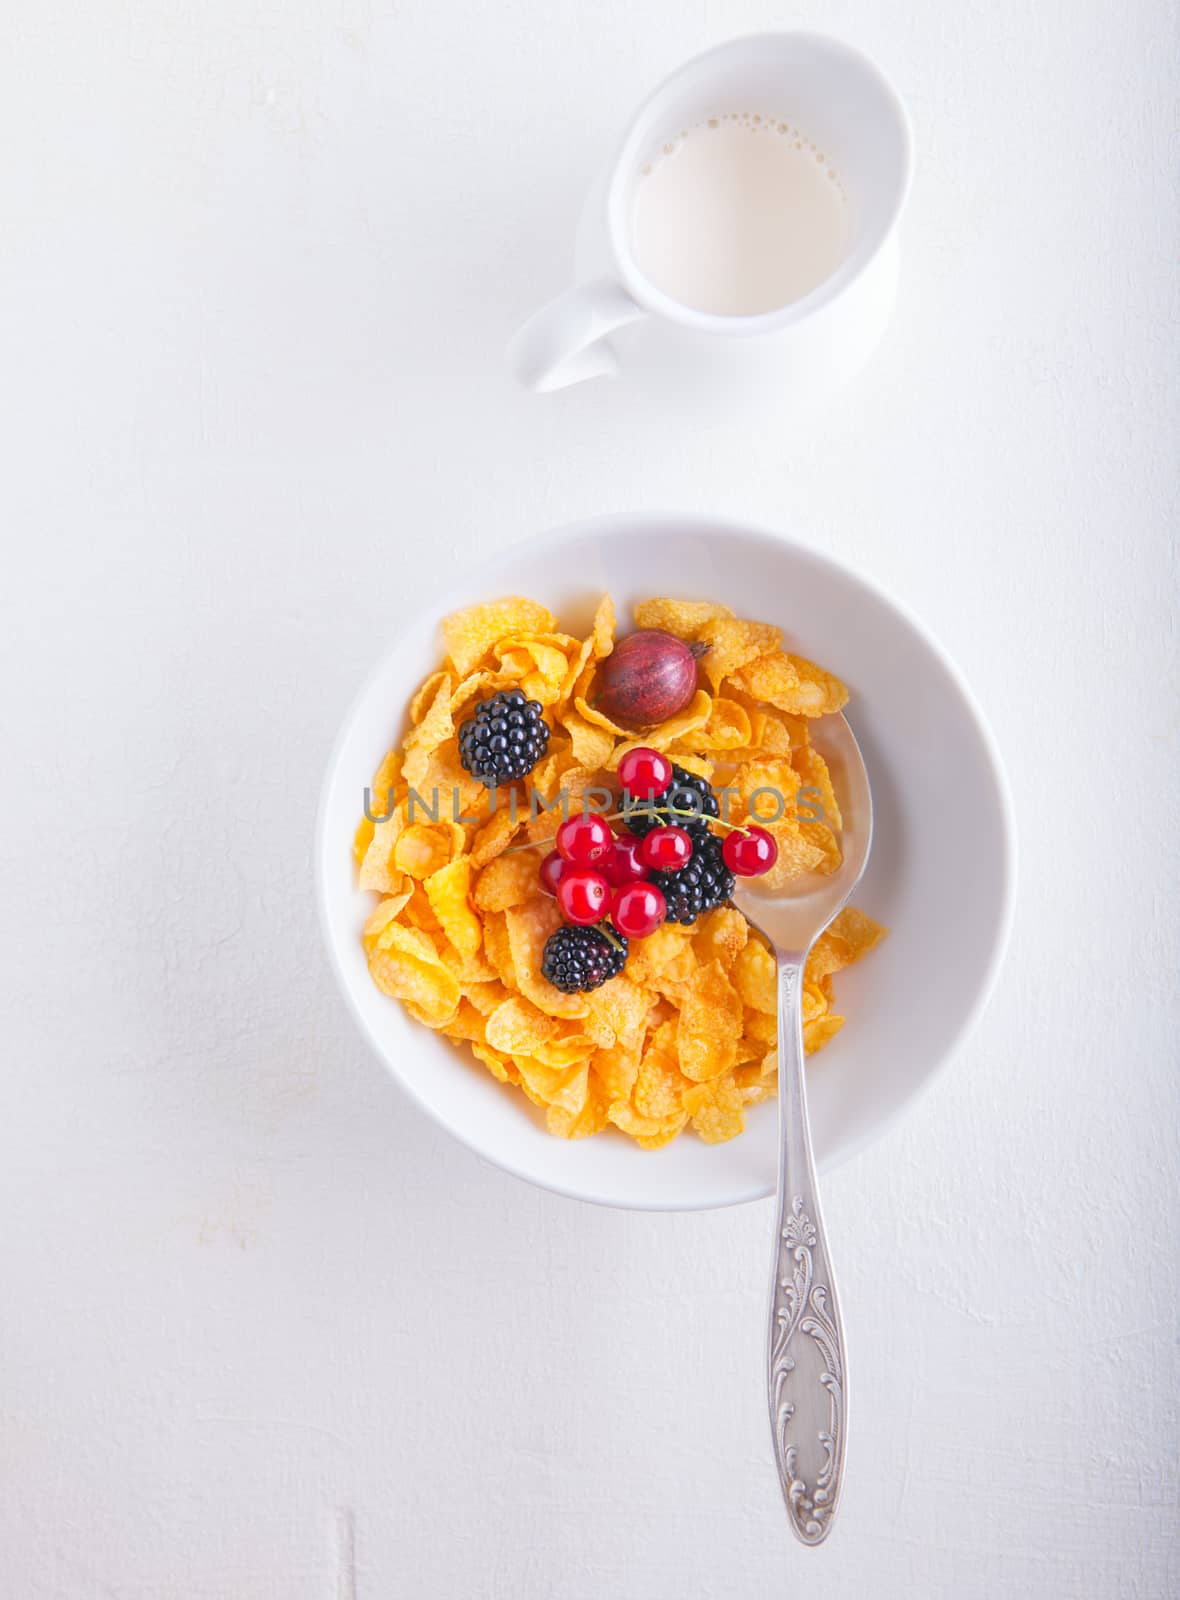 A fresh bowl of corn flakes served with berries